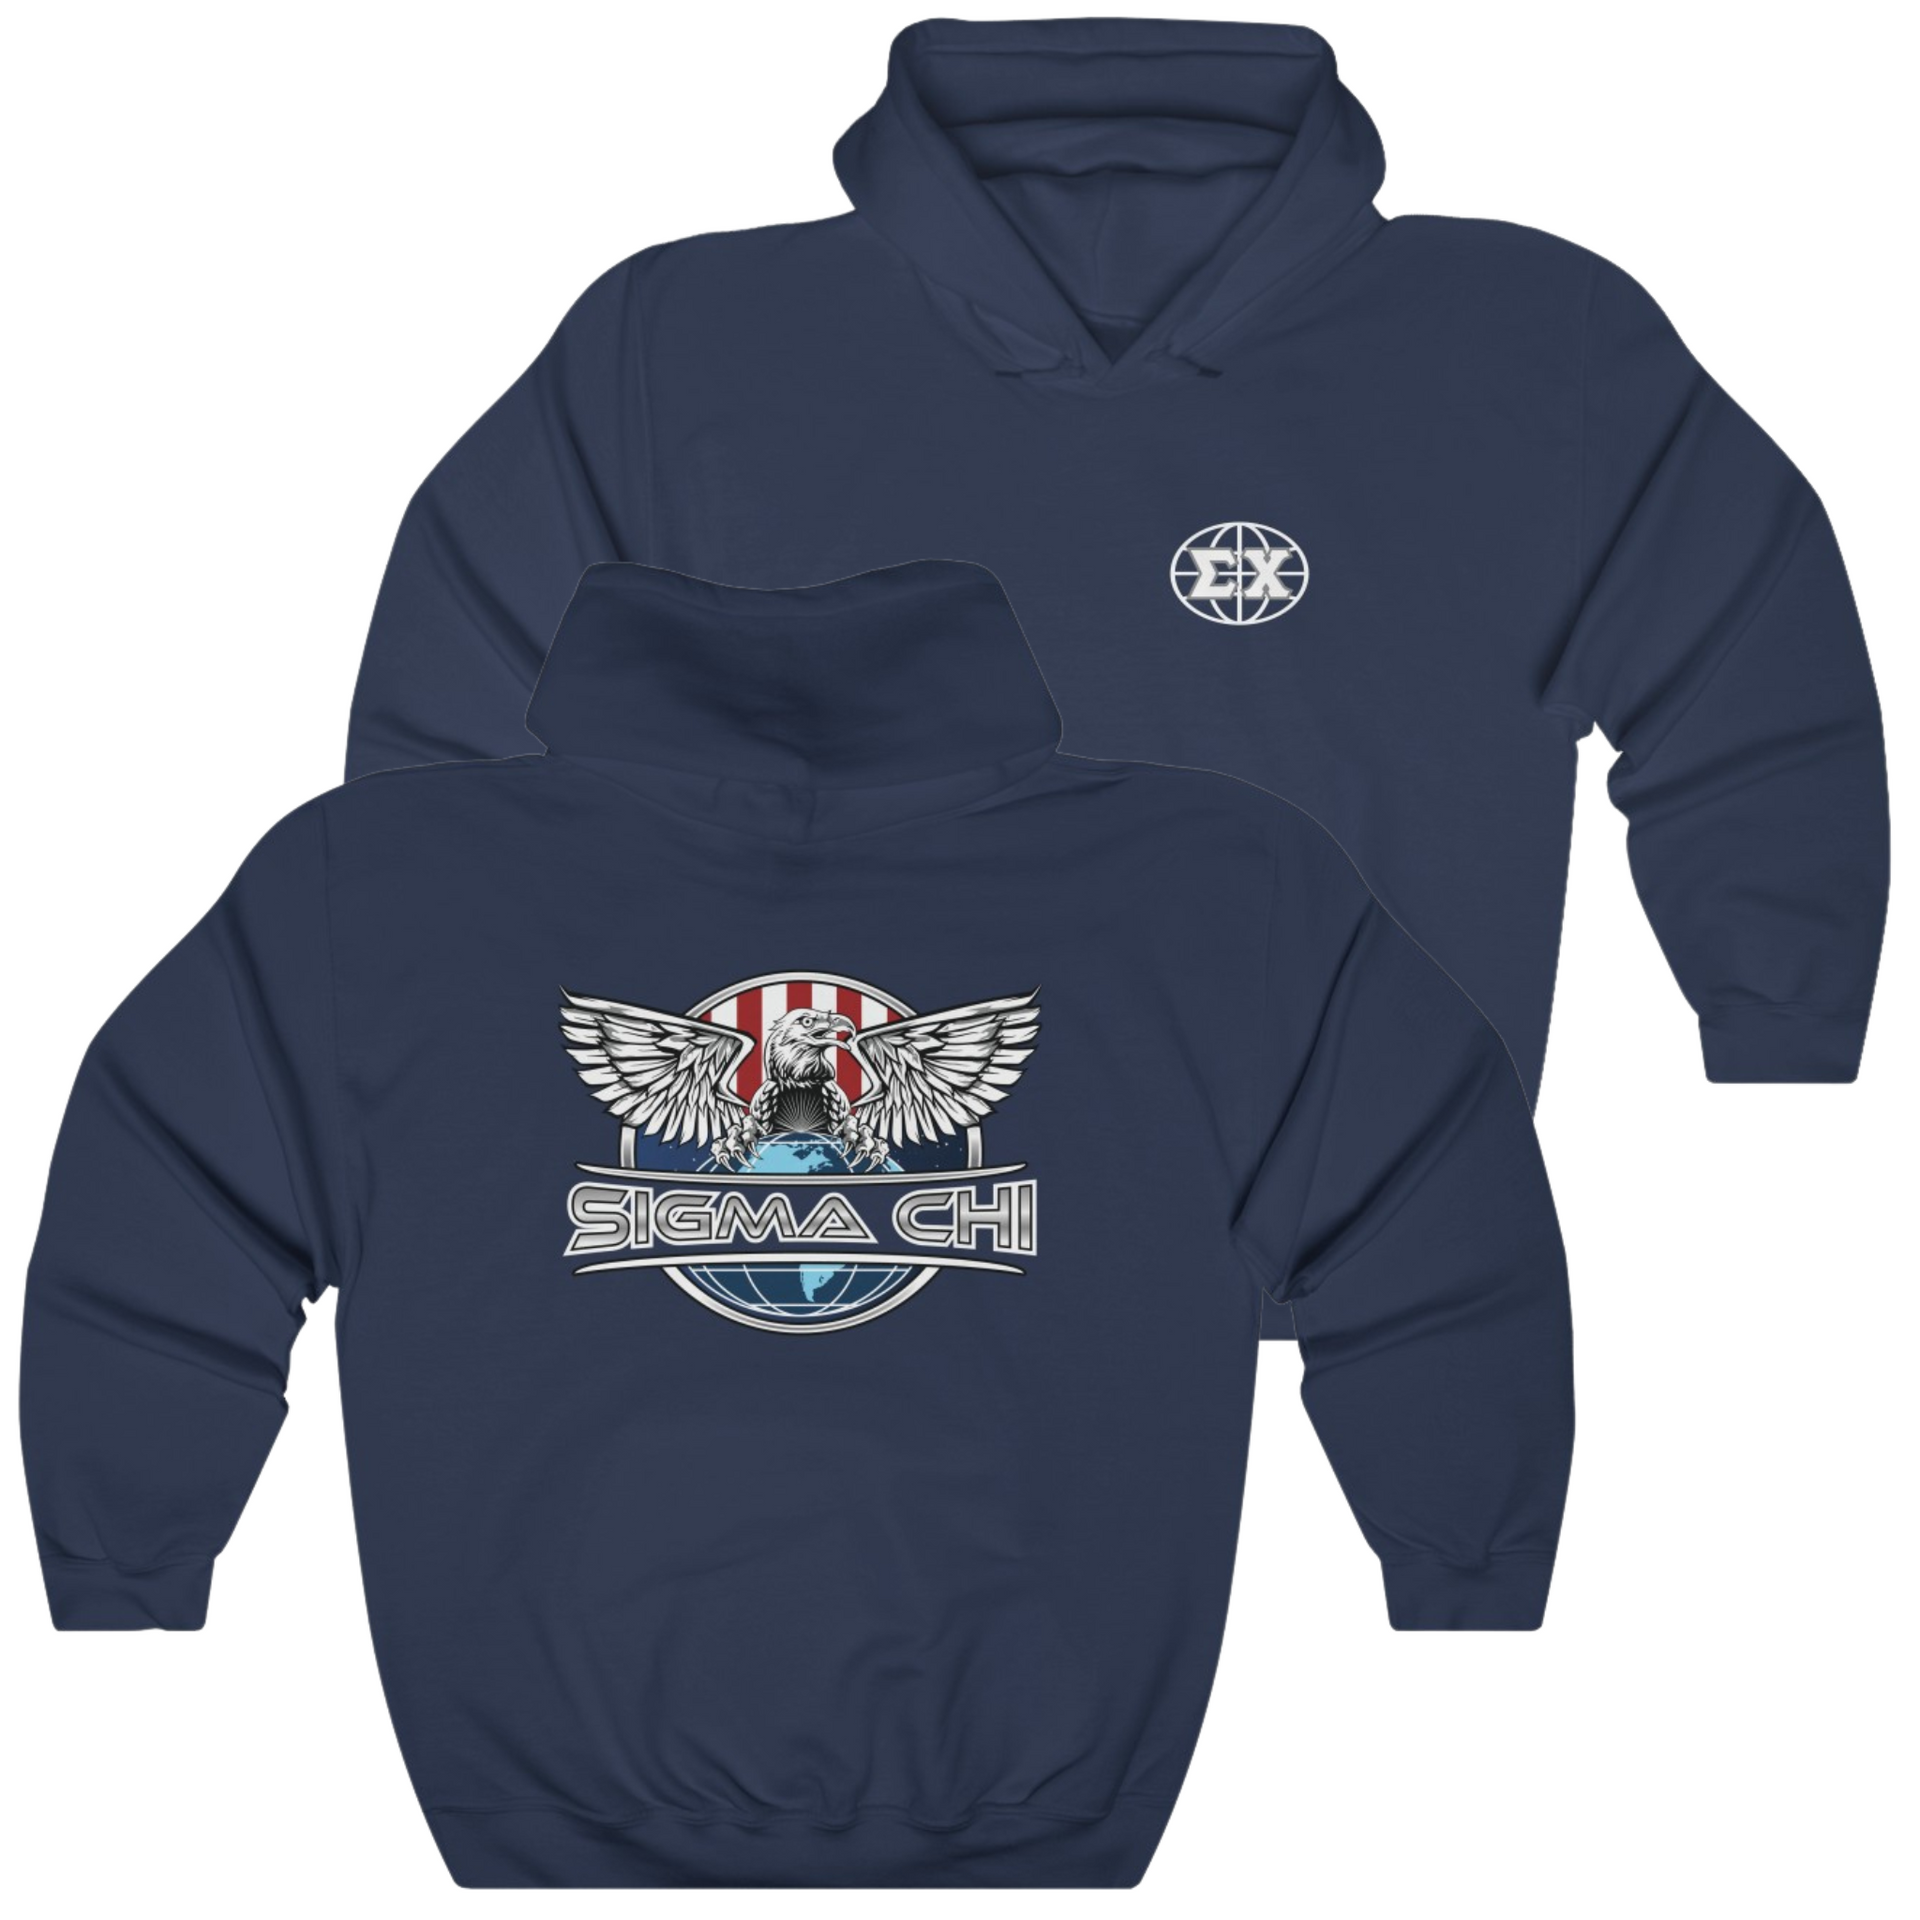 Navy Sigma Chi Graphic Hoodie | The Fraternal Order | Sigma Chi Fraternity Merch House